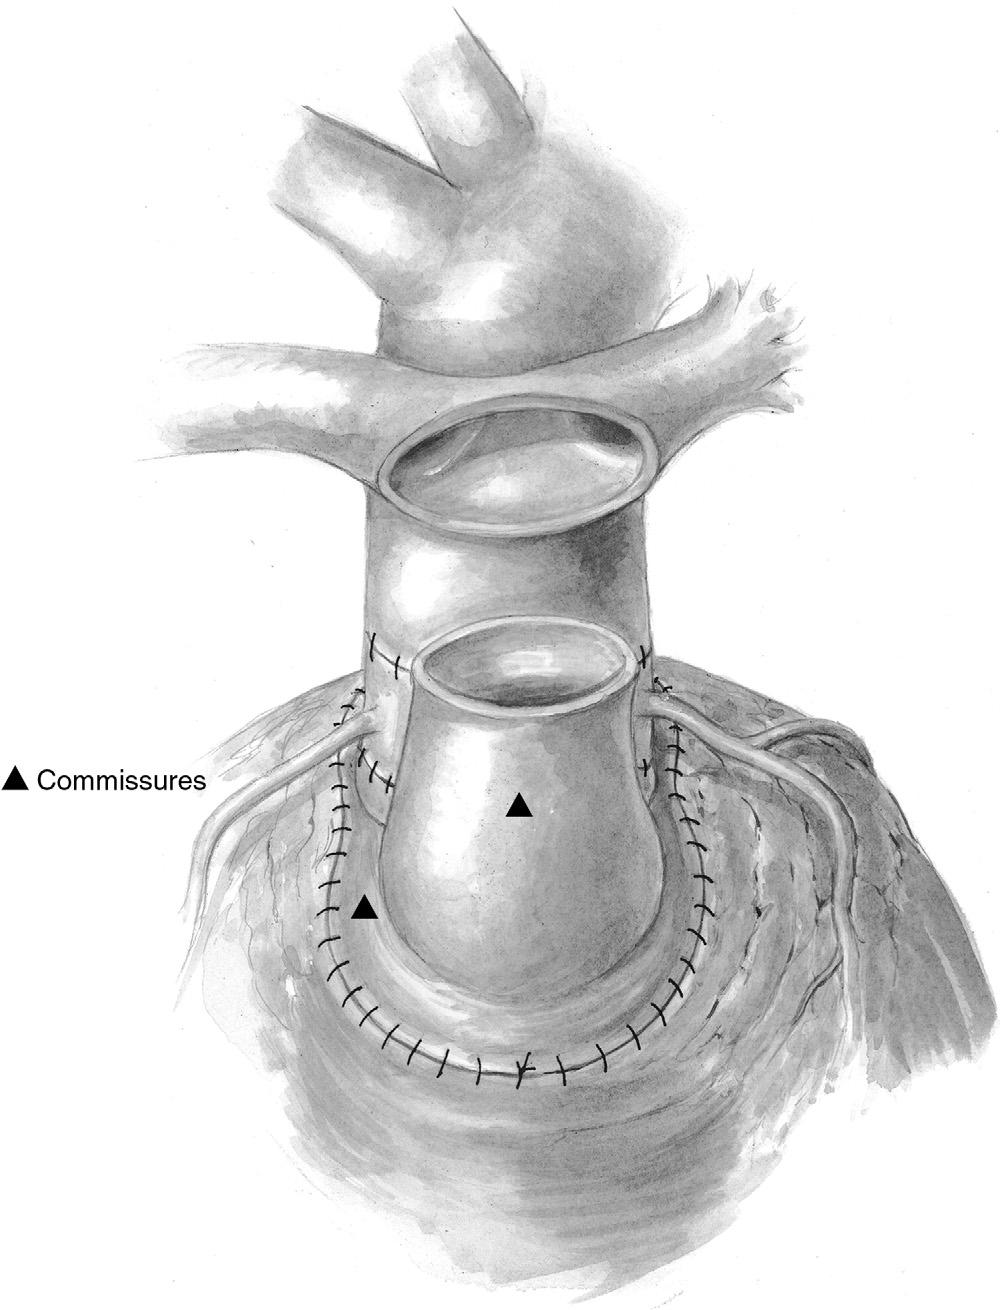 52 R. Mair Figure 7 The pulmonary valve is now inspected and sized. In many cases, it is bicuspid, and in other cases, it is tricuspid and dysplastic.